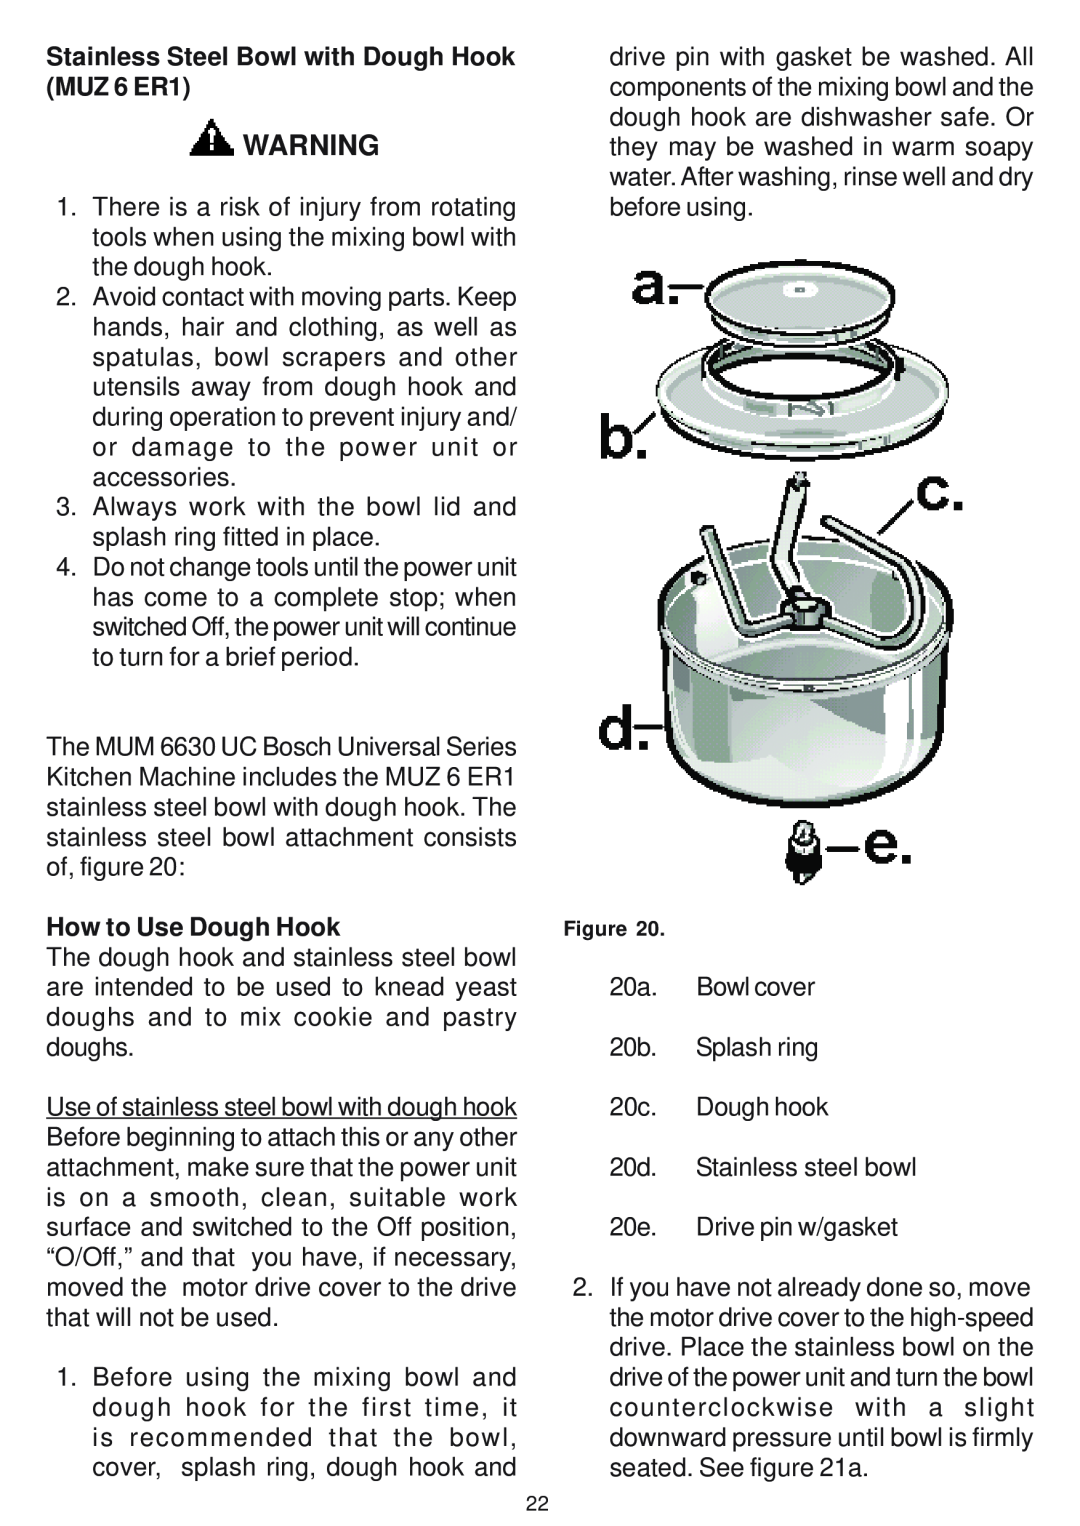 Bosch Appliances MUM 6610 UC owner manual Stainless Steel Bowl with Dough Hook MUZ 6 ER1, How to Use Dough Hook 